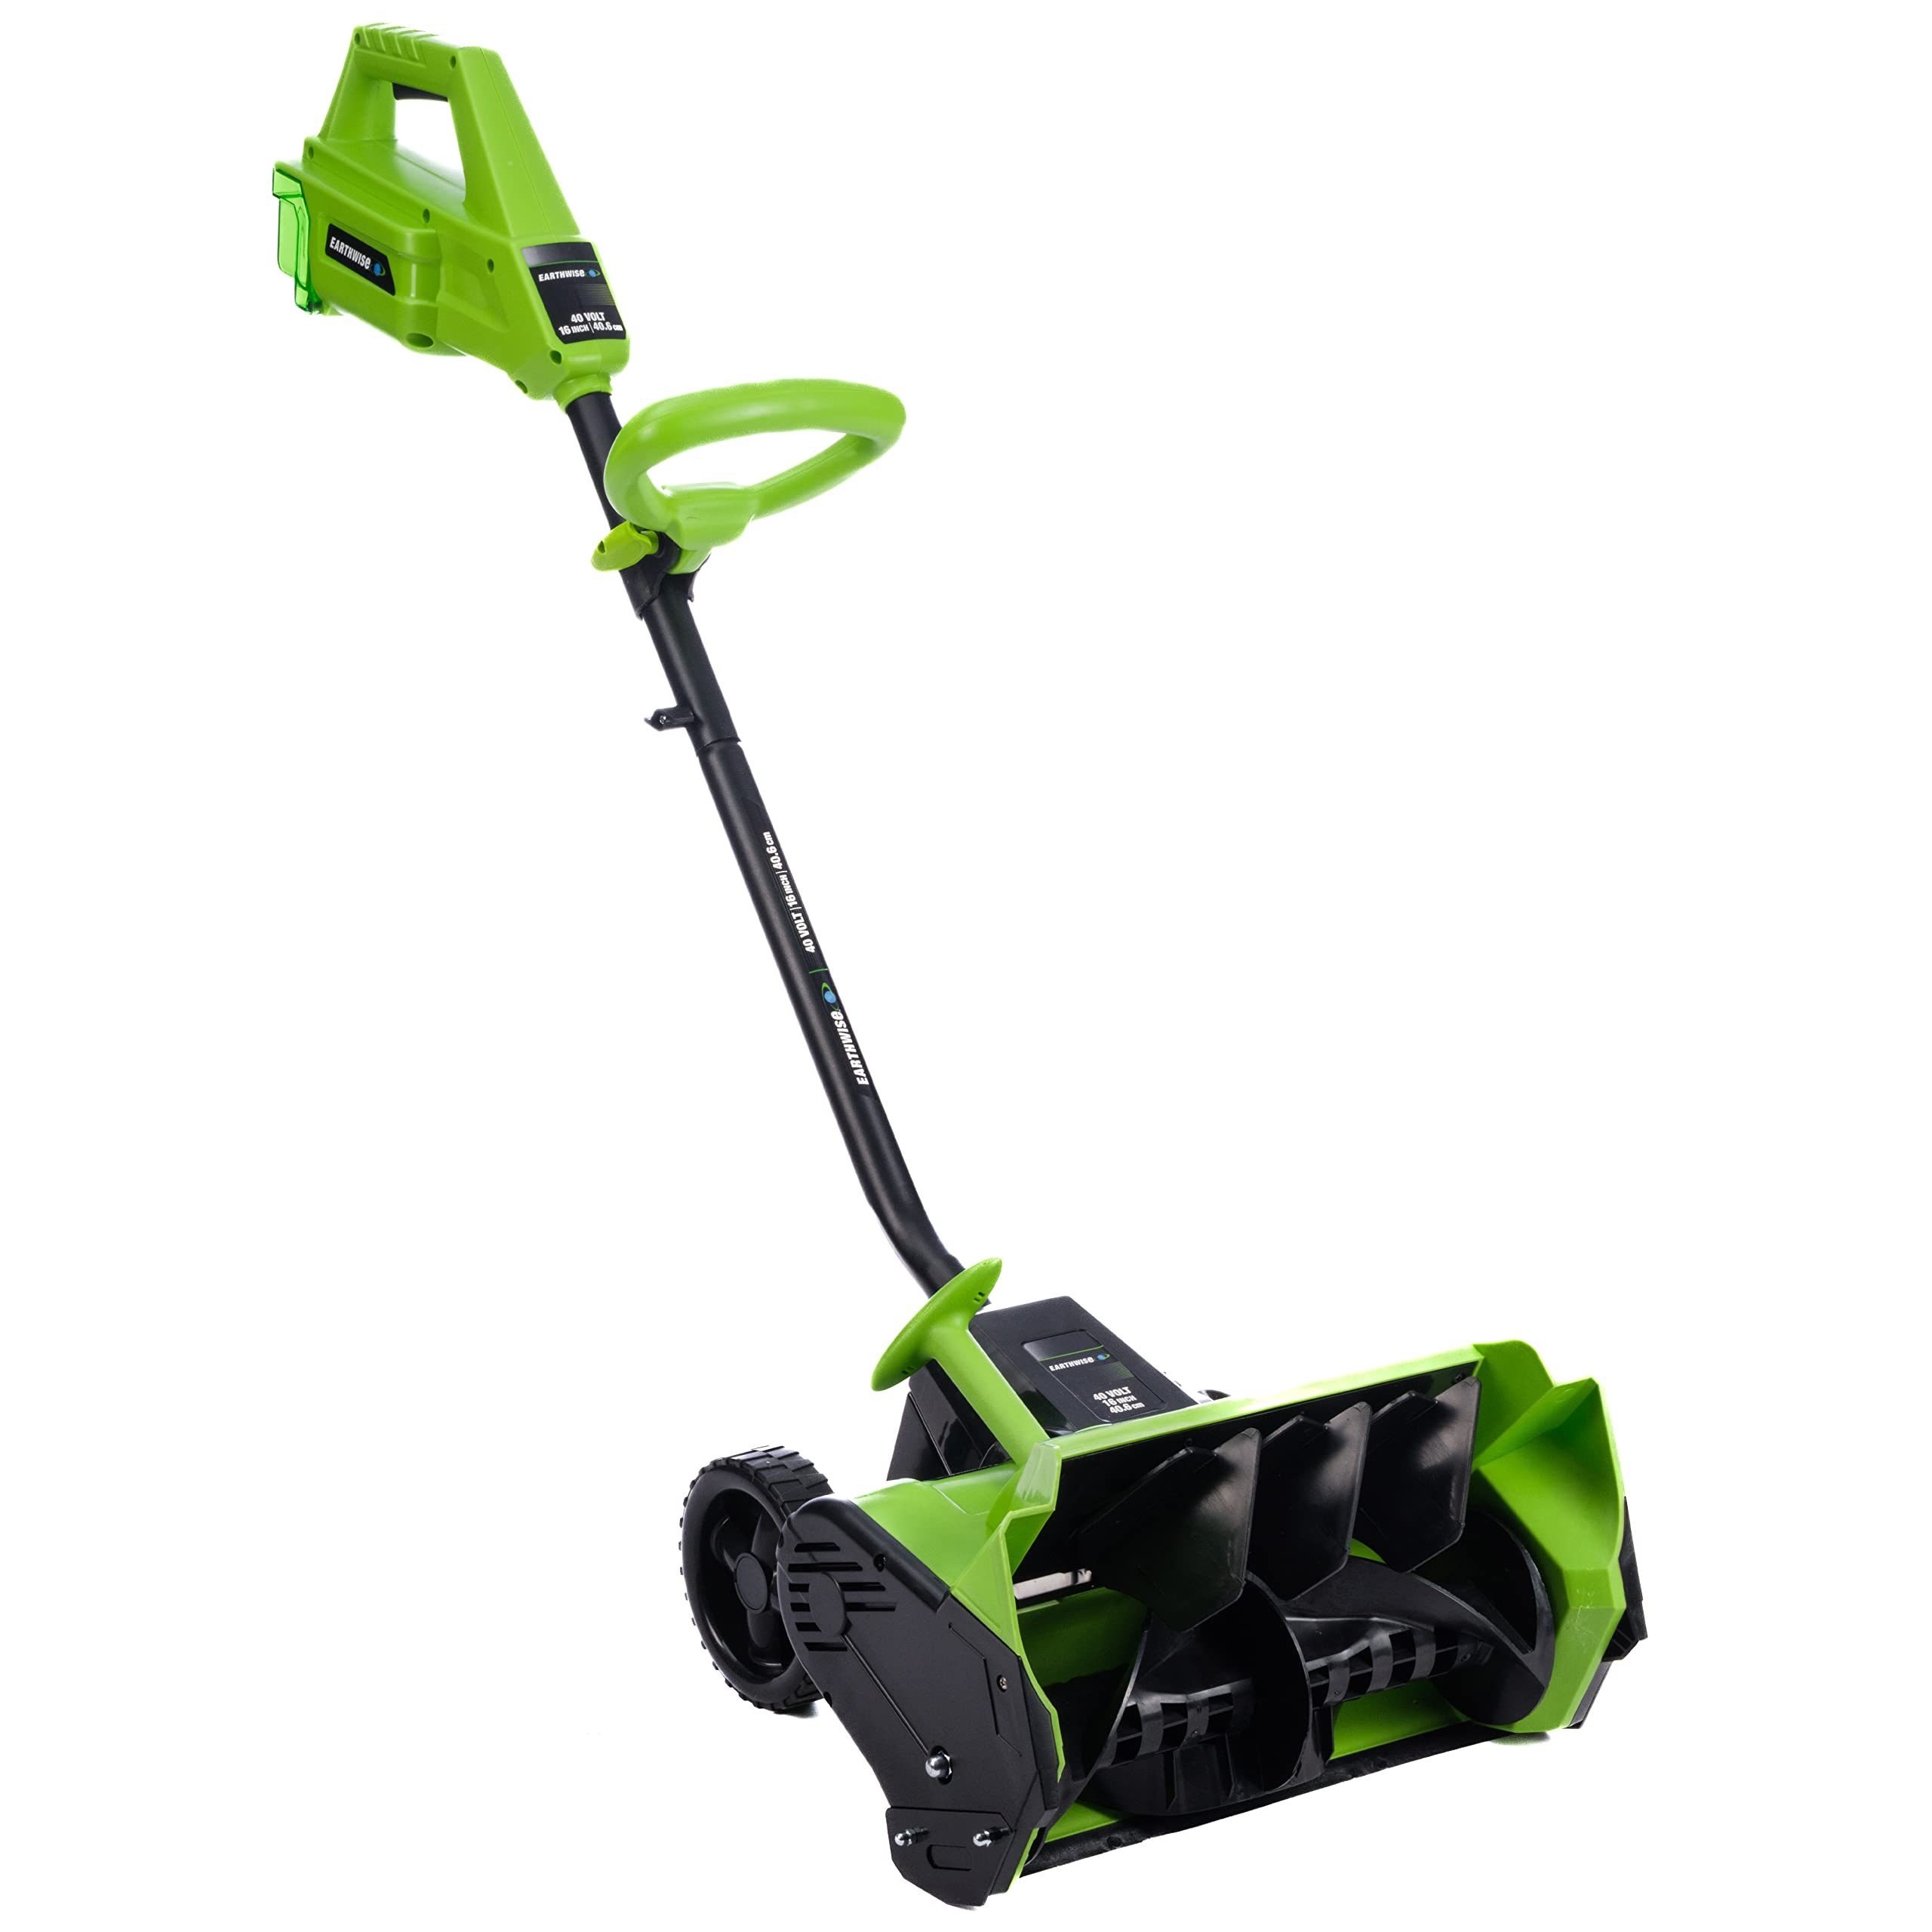 Earthwise Power Tool Earthwise SN74016 40-Volt Cordless Electric Snow Shovel, Brushless Motor, 16-Inch width, 300lbs/Minute (Battery and Charger Incl